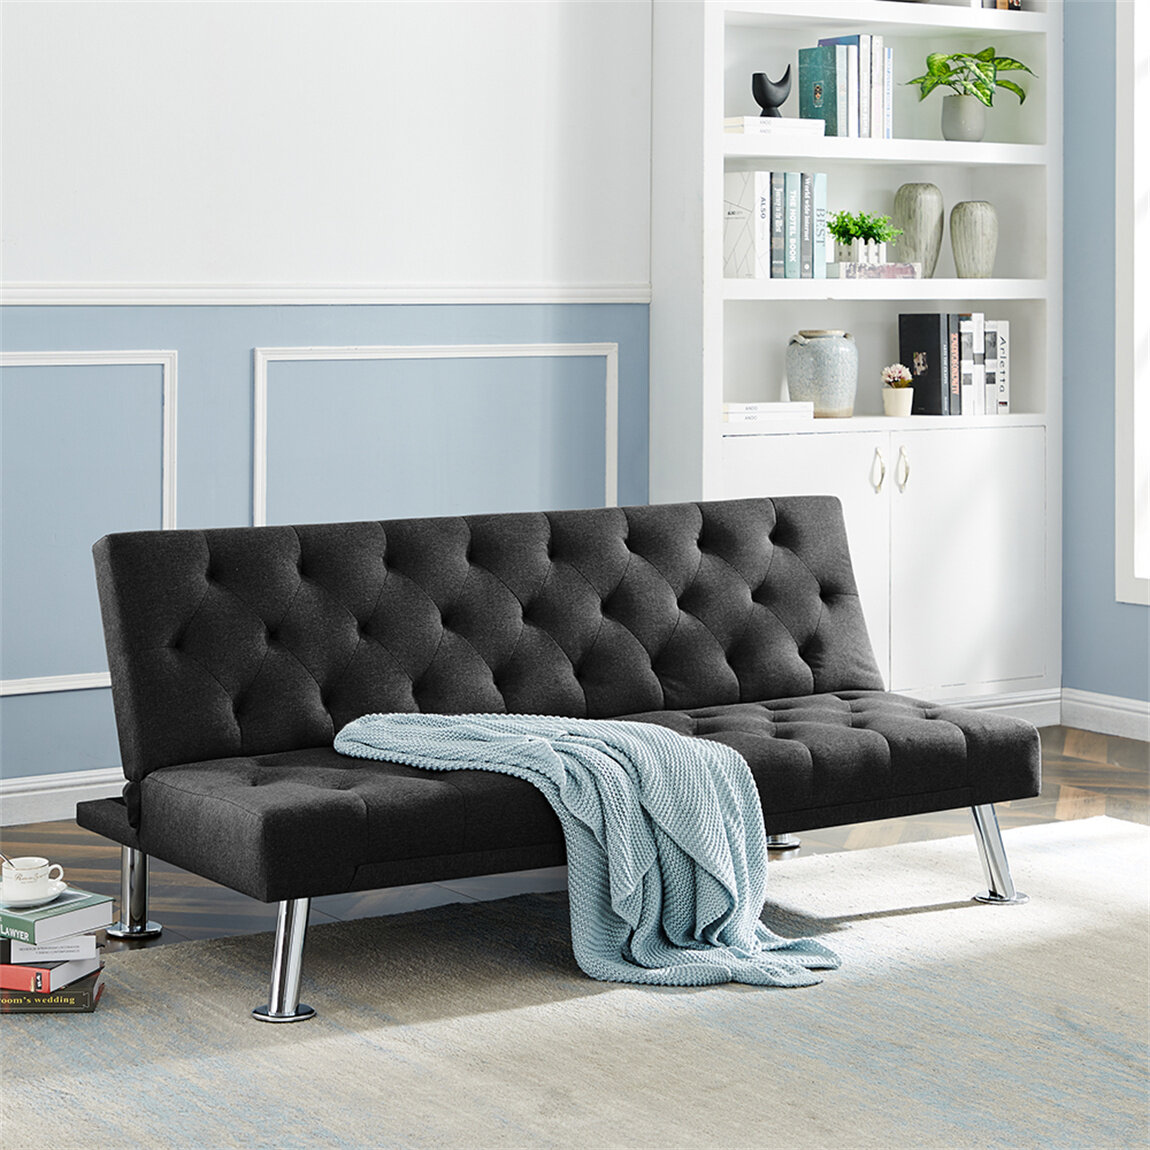 Details about   Modern Convertible Futon Sofa Bed Sleeper Adjustable Couch Full Size Living Room 